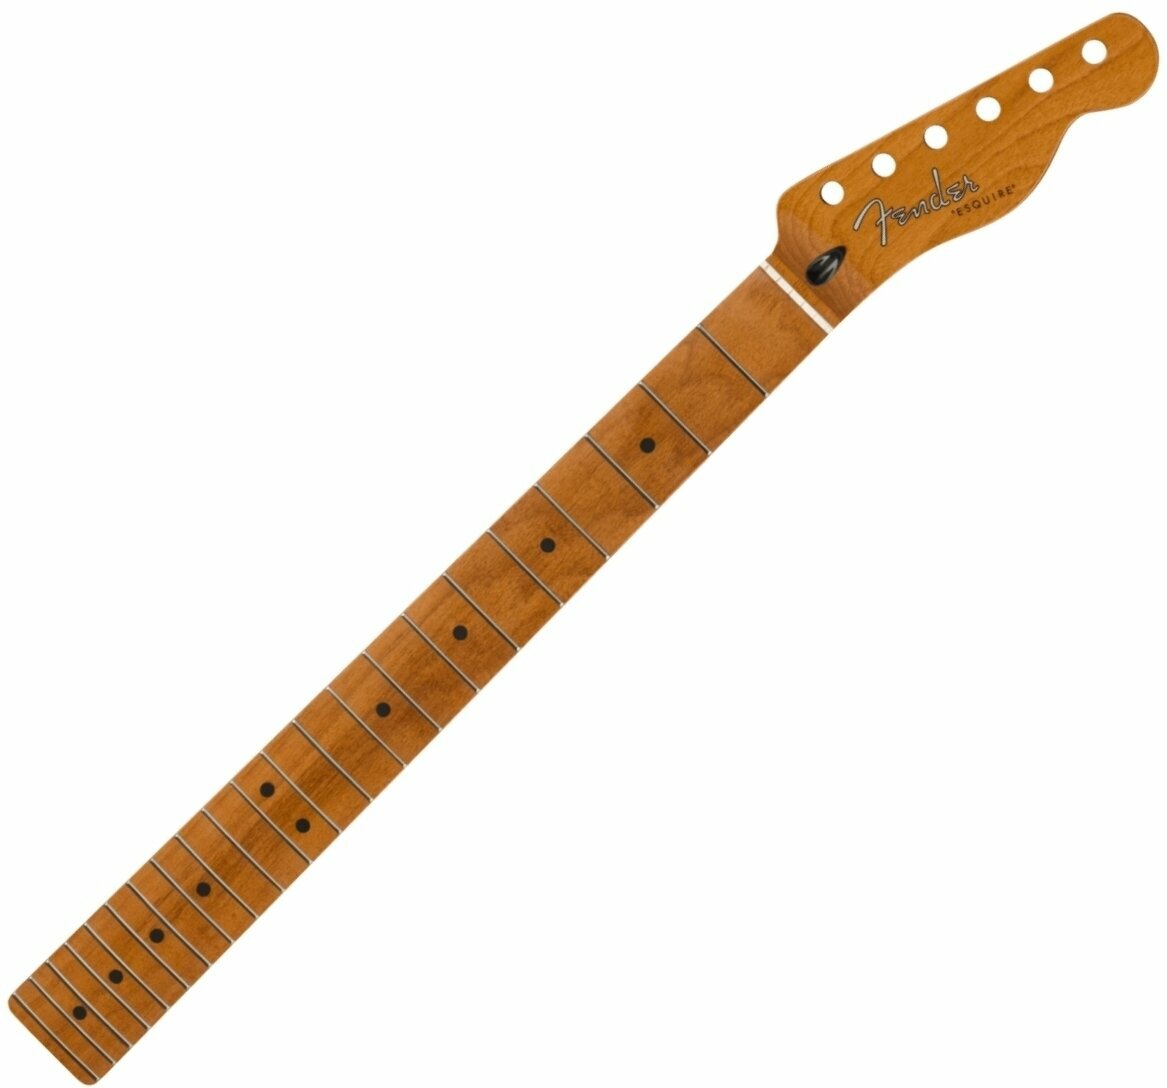 Guitar neck Fender 50's Modified Esquire 22 Roasted Maple Guitar neck